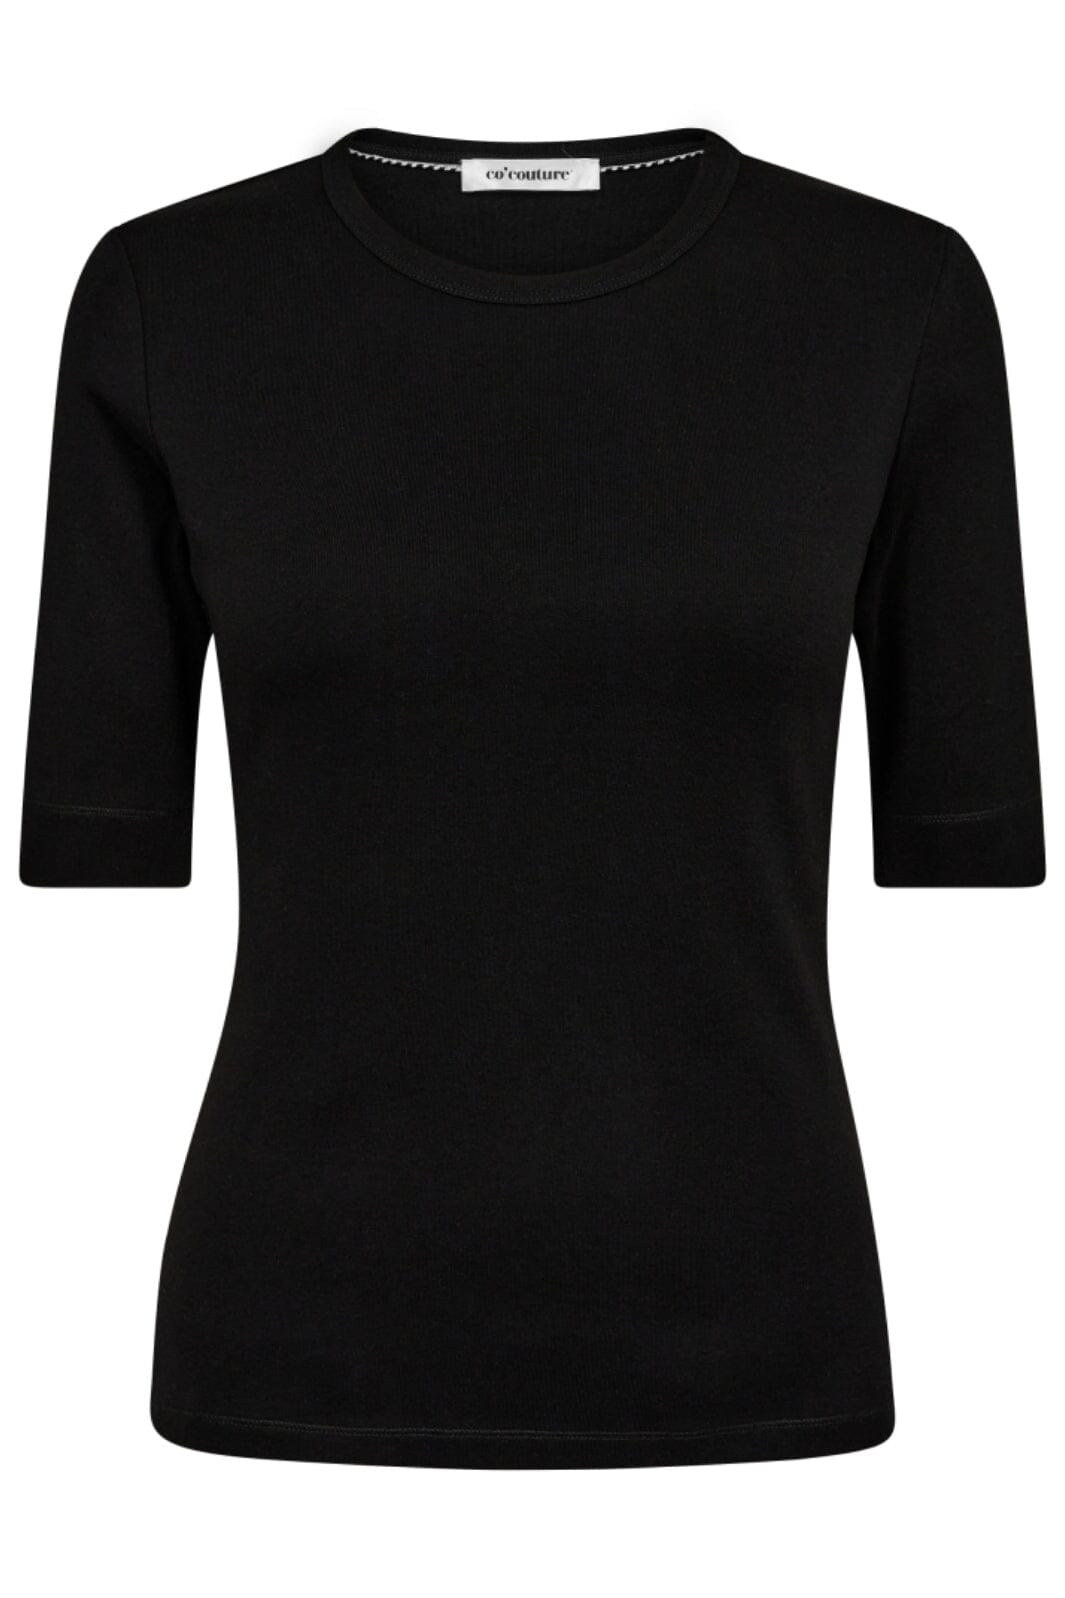 Co´couture - Grannycc Ss Tee 33016 - 96 Black T-shirts 